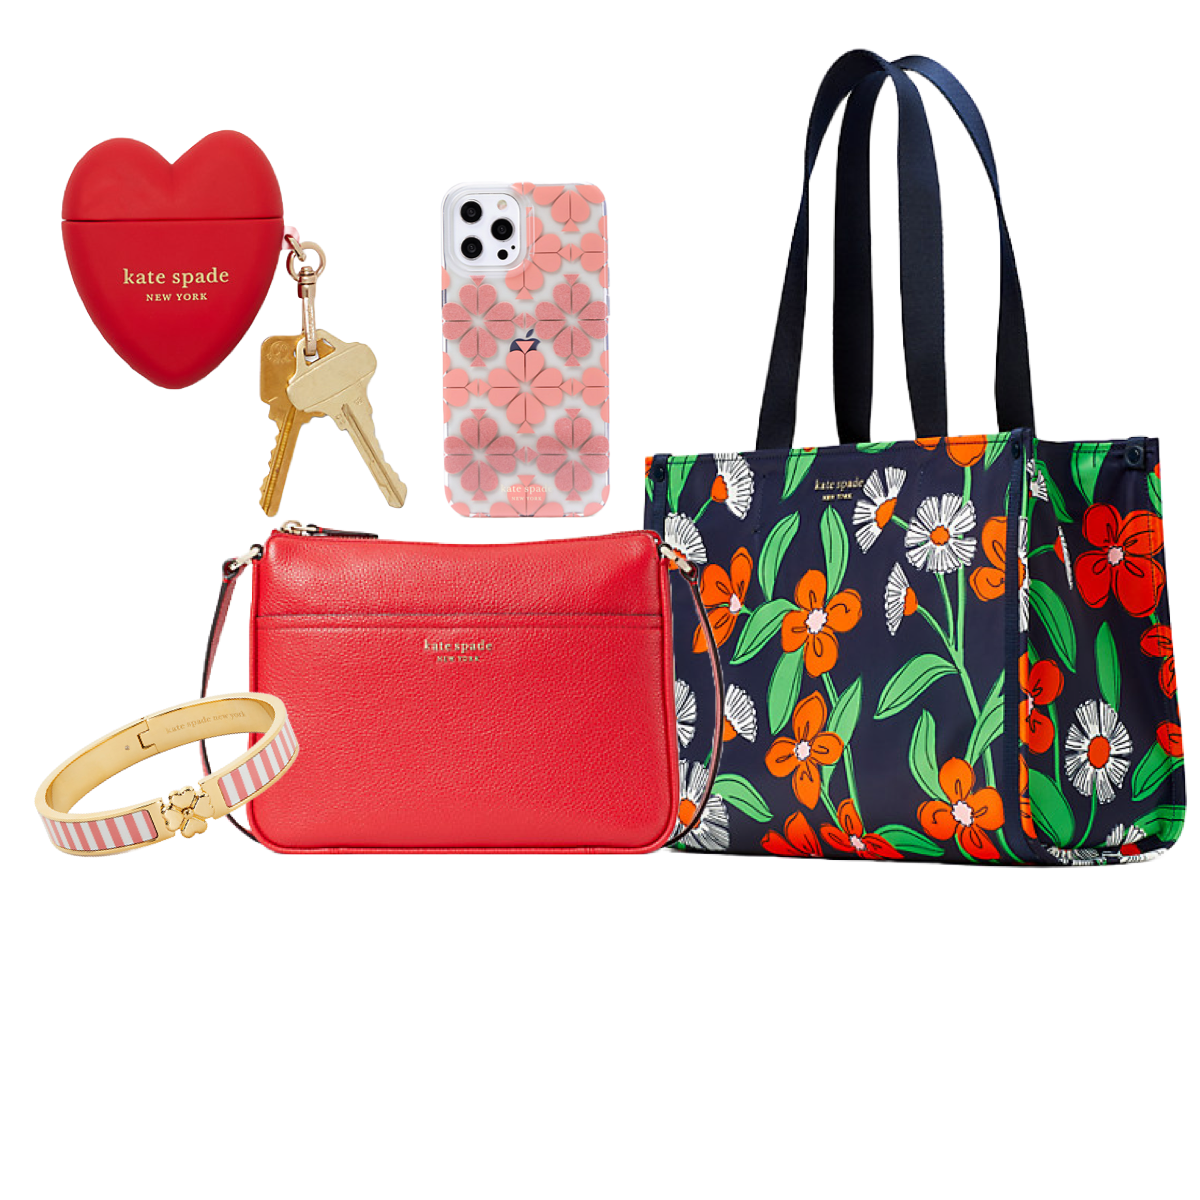 Kate Spade's End of Season Sale: All Sale Styles Are an Extra 30% Off